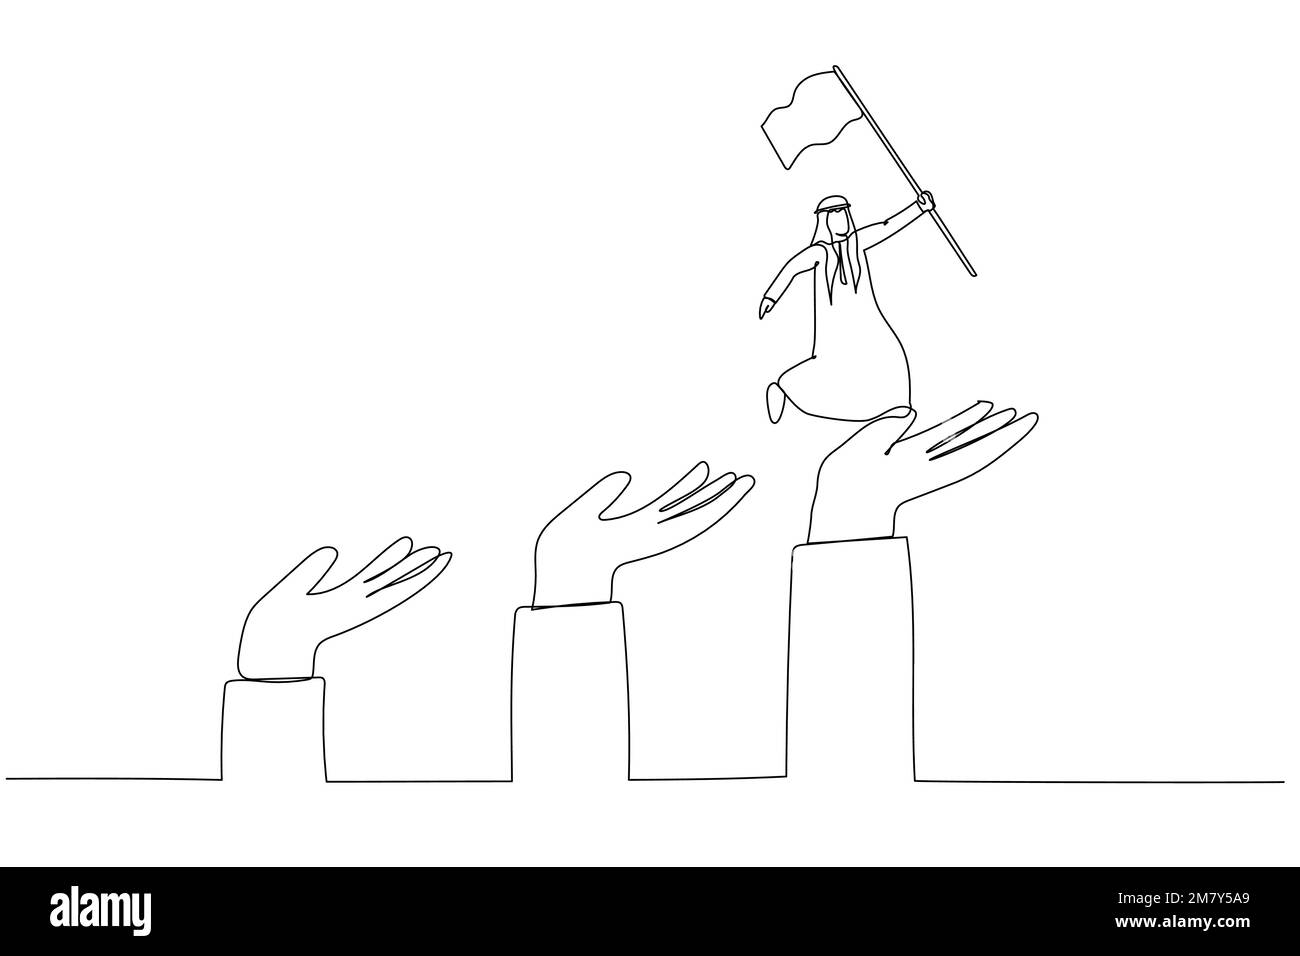 Cartoon of arab man jumping up giant hand growth ladder concept of progress. One line art style design Stock Vector